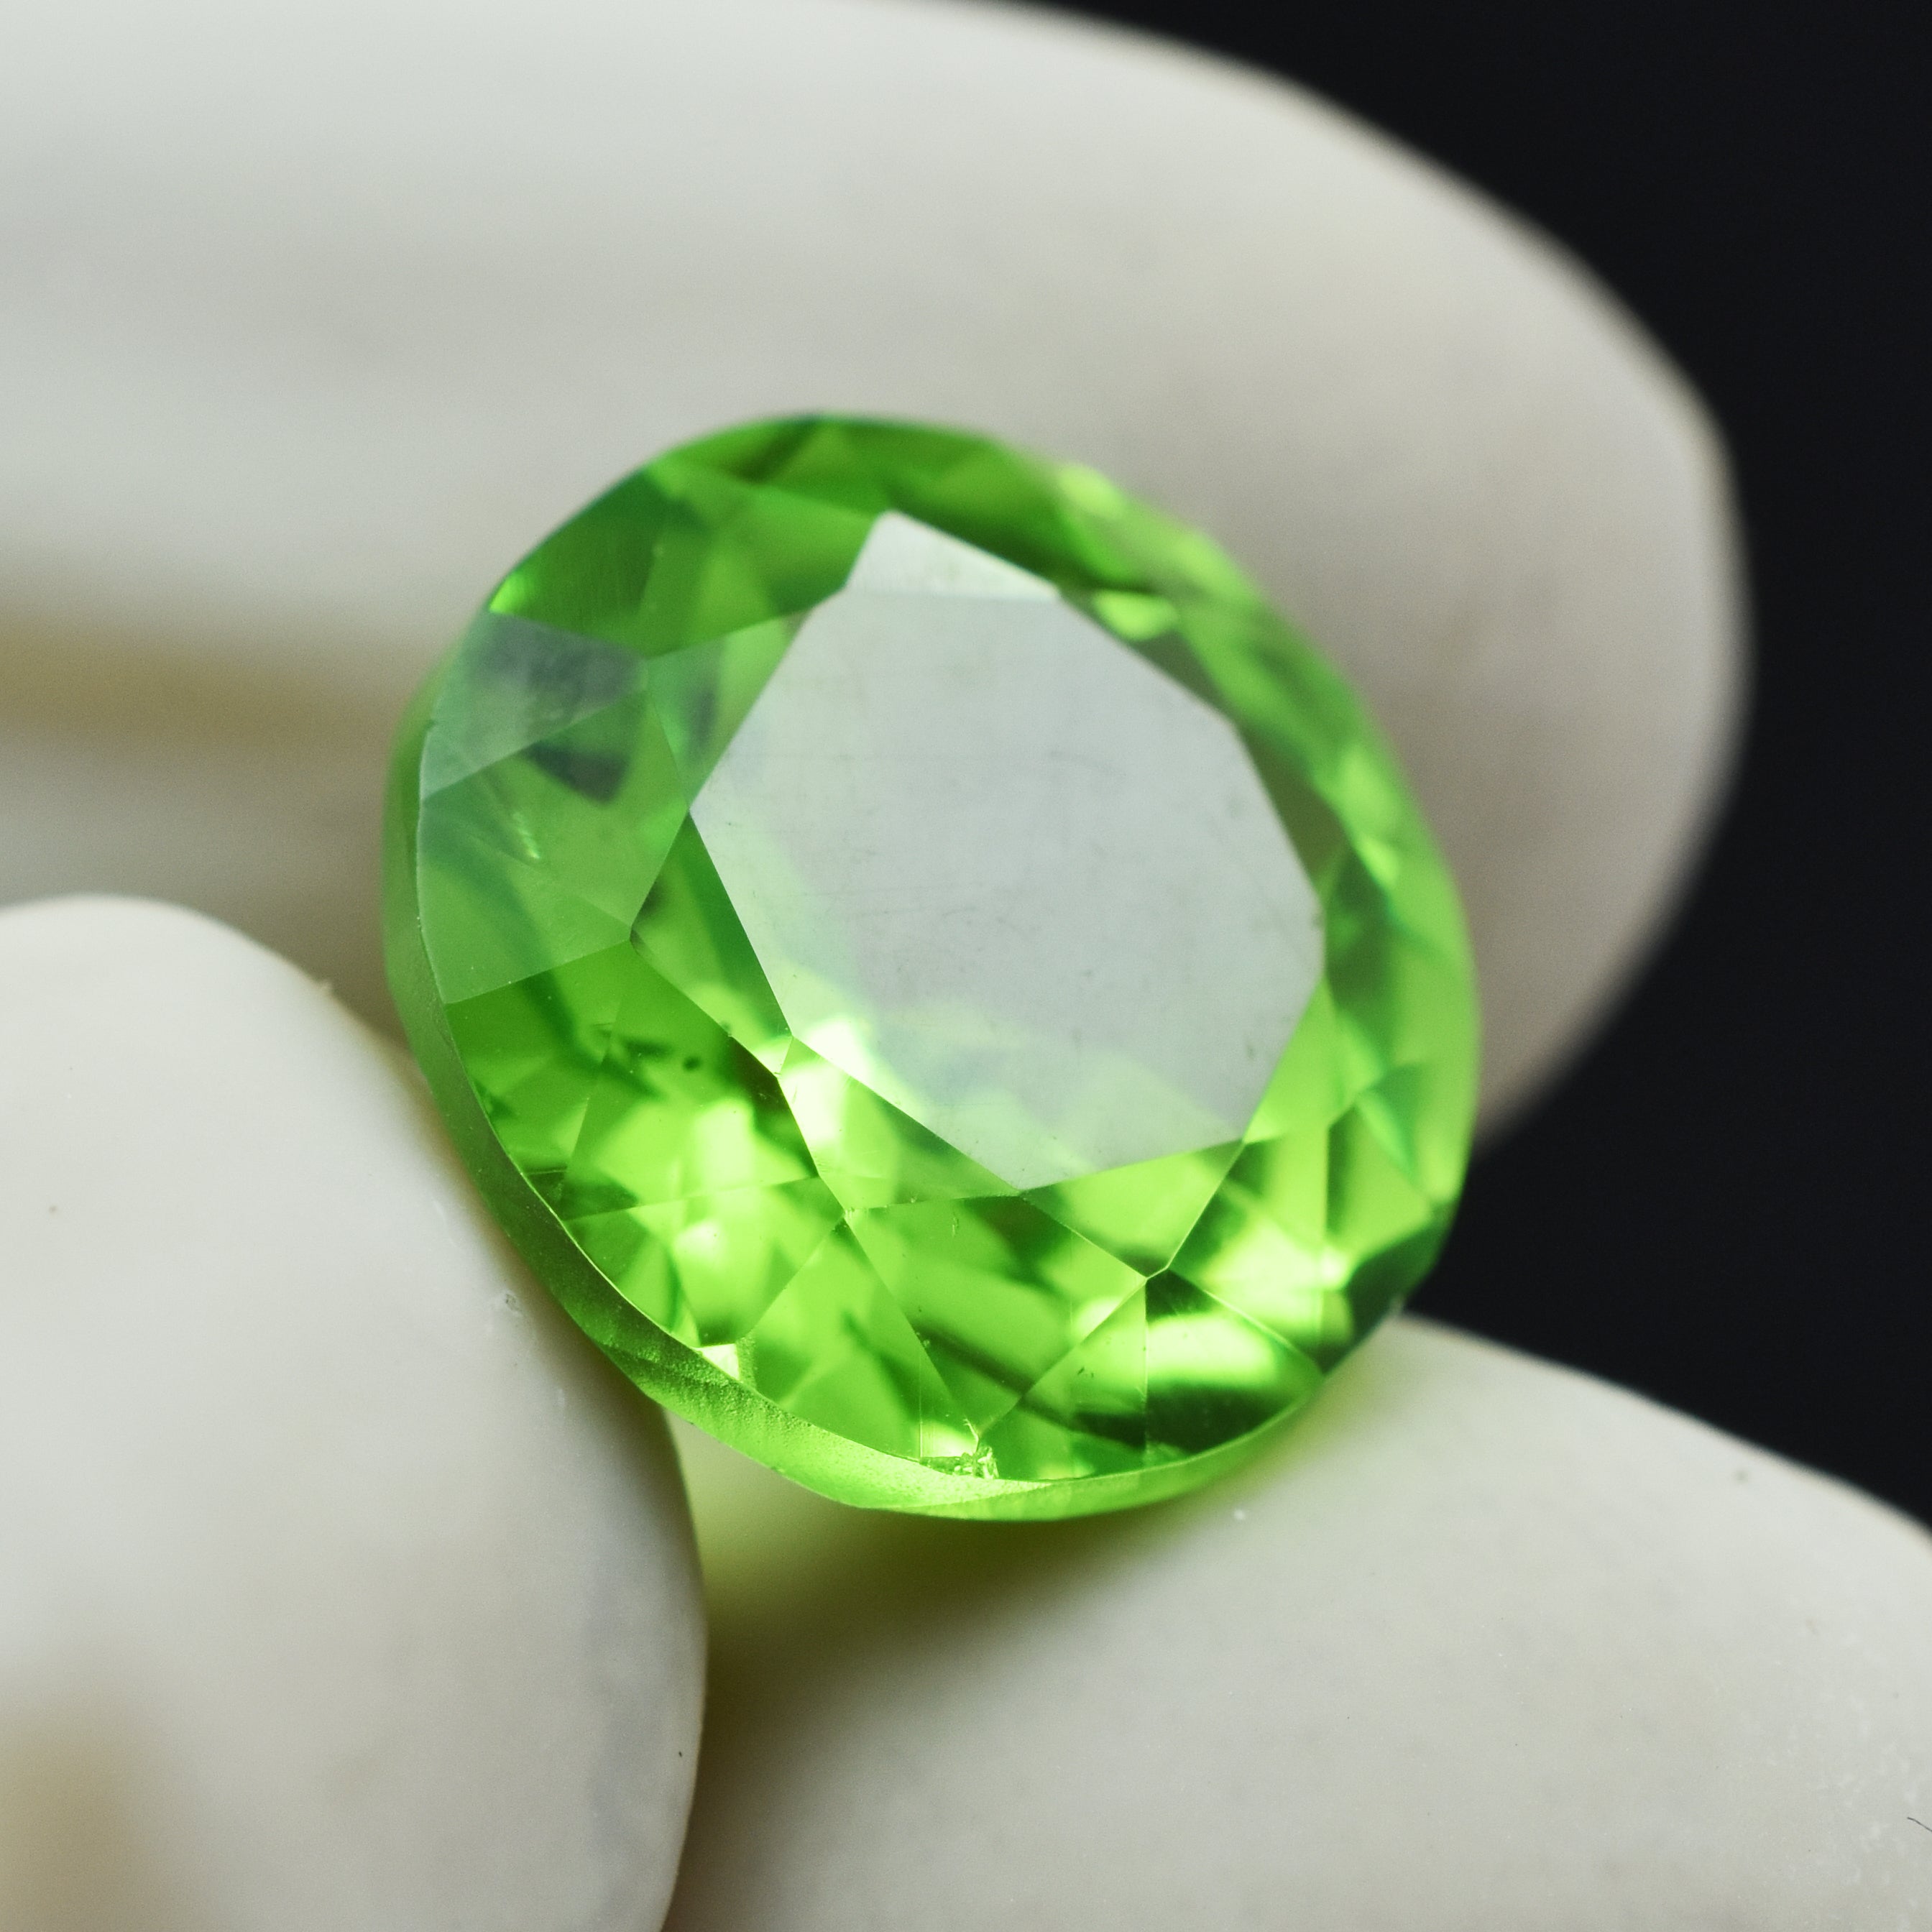 Best For Positivity & Good Luck !! Peridot Green 8.36 Carat Natural Certified Round Shape Loose Gemstone , Best Offer , Peridot Jwelery , Natural Peridot